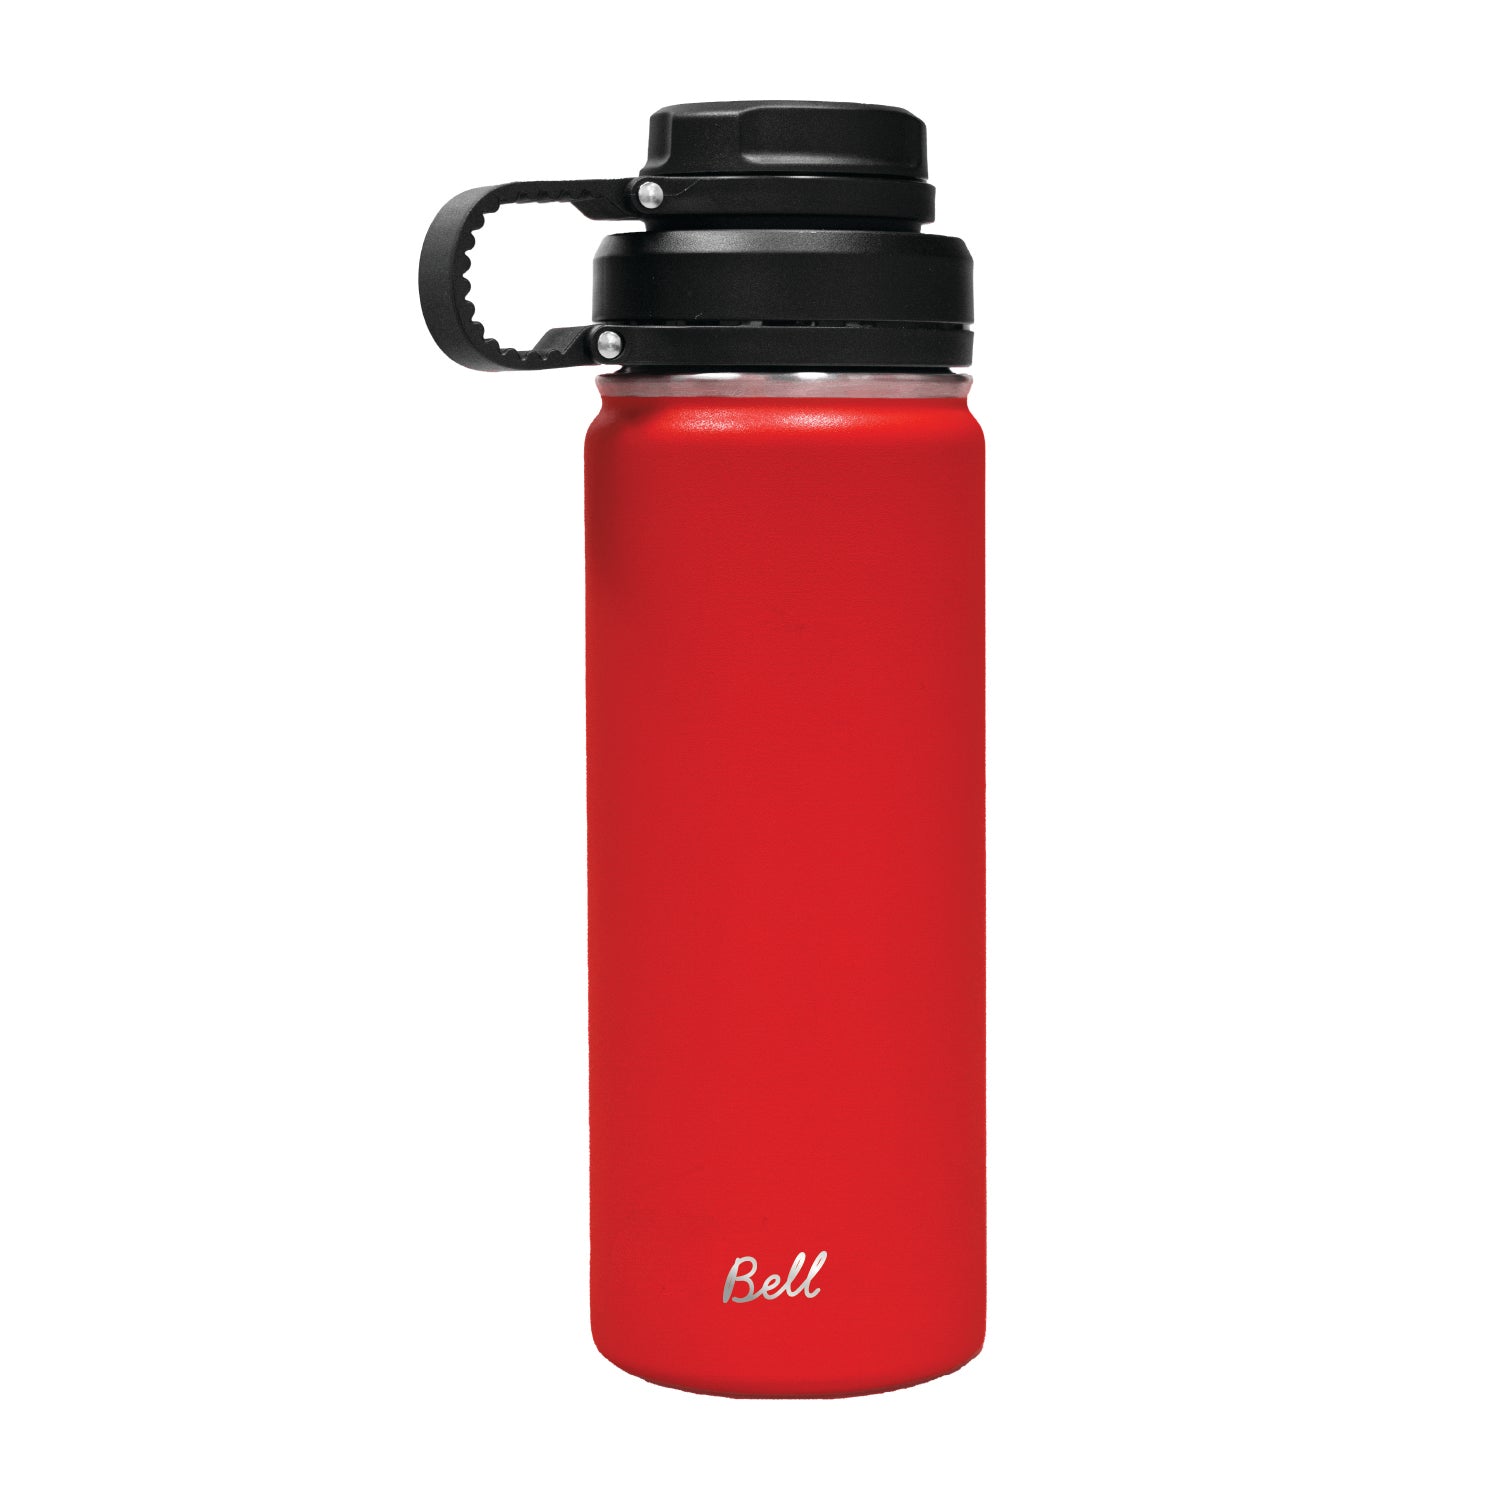 Bell Stainless Steel - Filter Lid - 500ml (18oz)